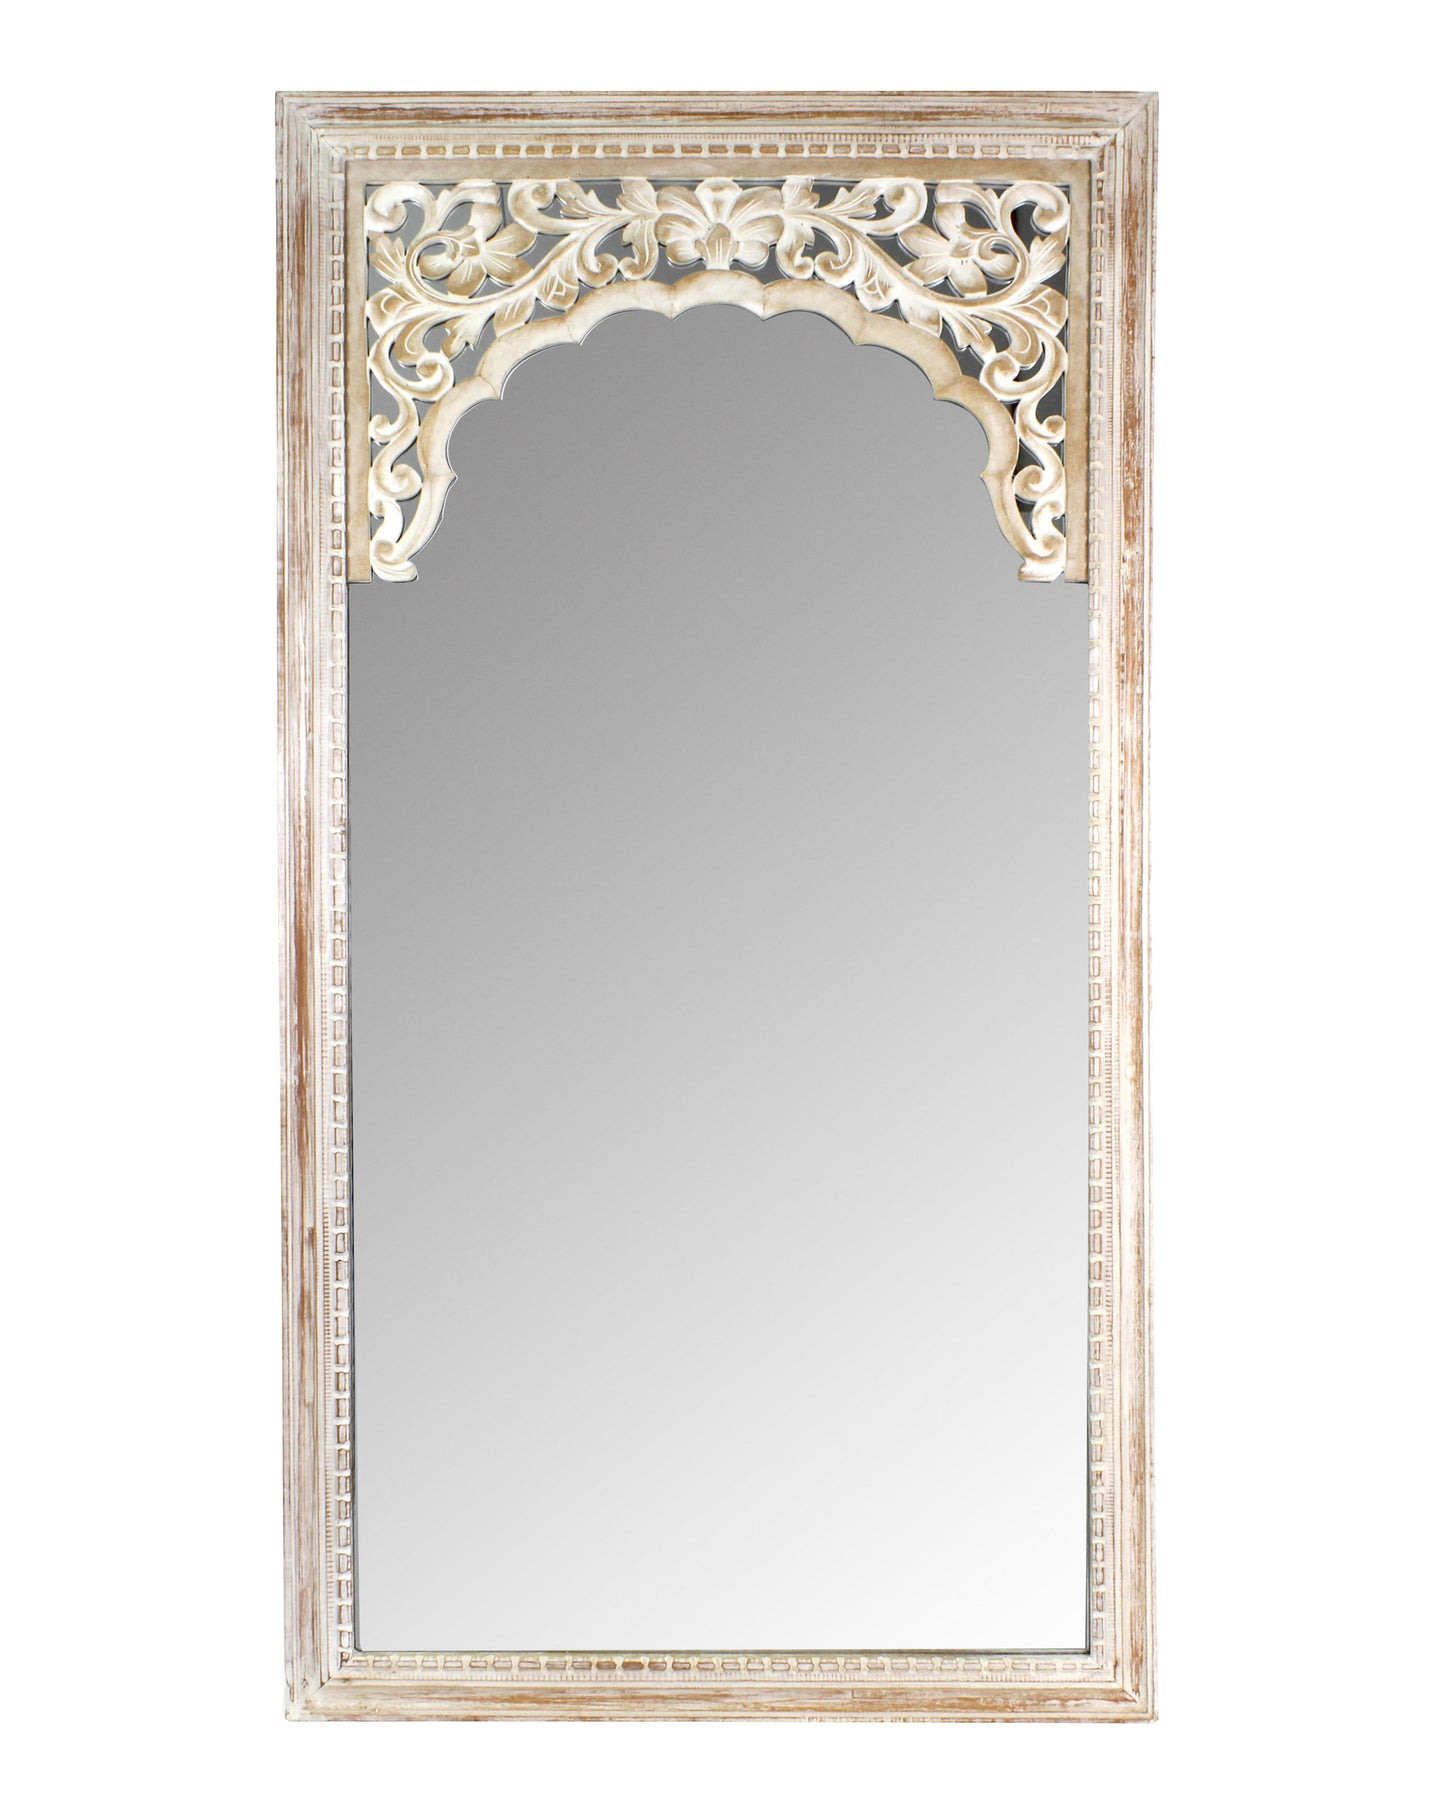 Hand Carved Mirror "Cahaya" in antic wash - 150 cm